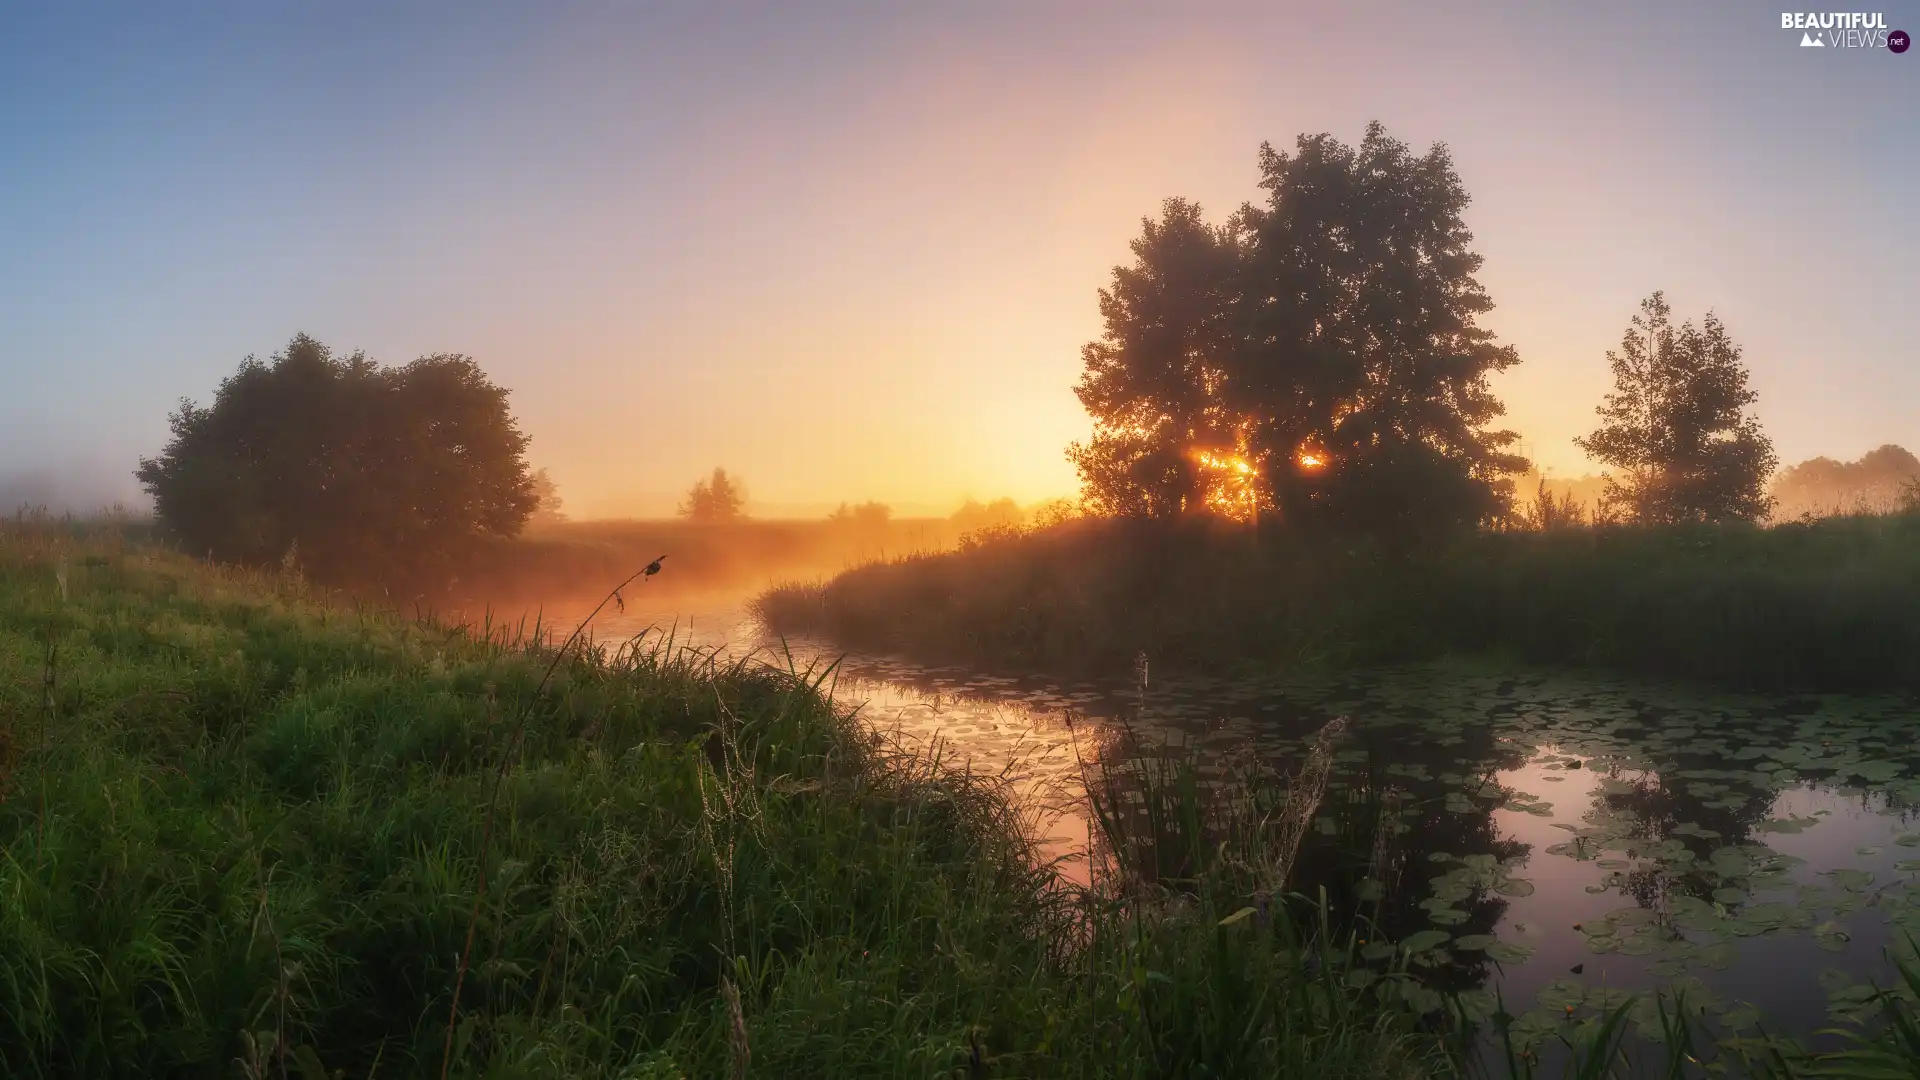 Meadow, River, viewes, Sunrise, trees, Fog